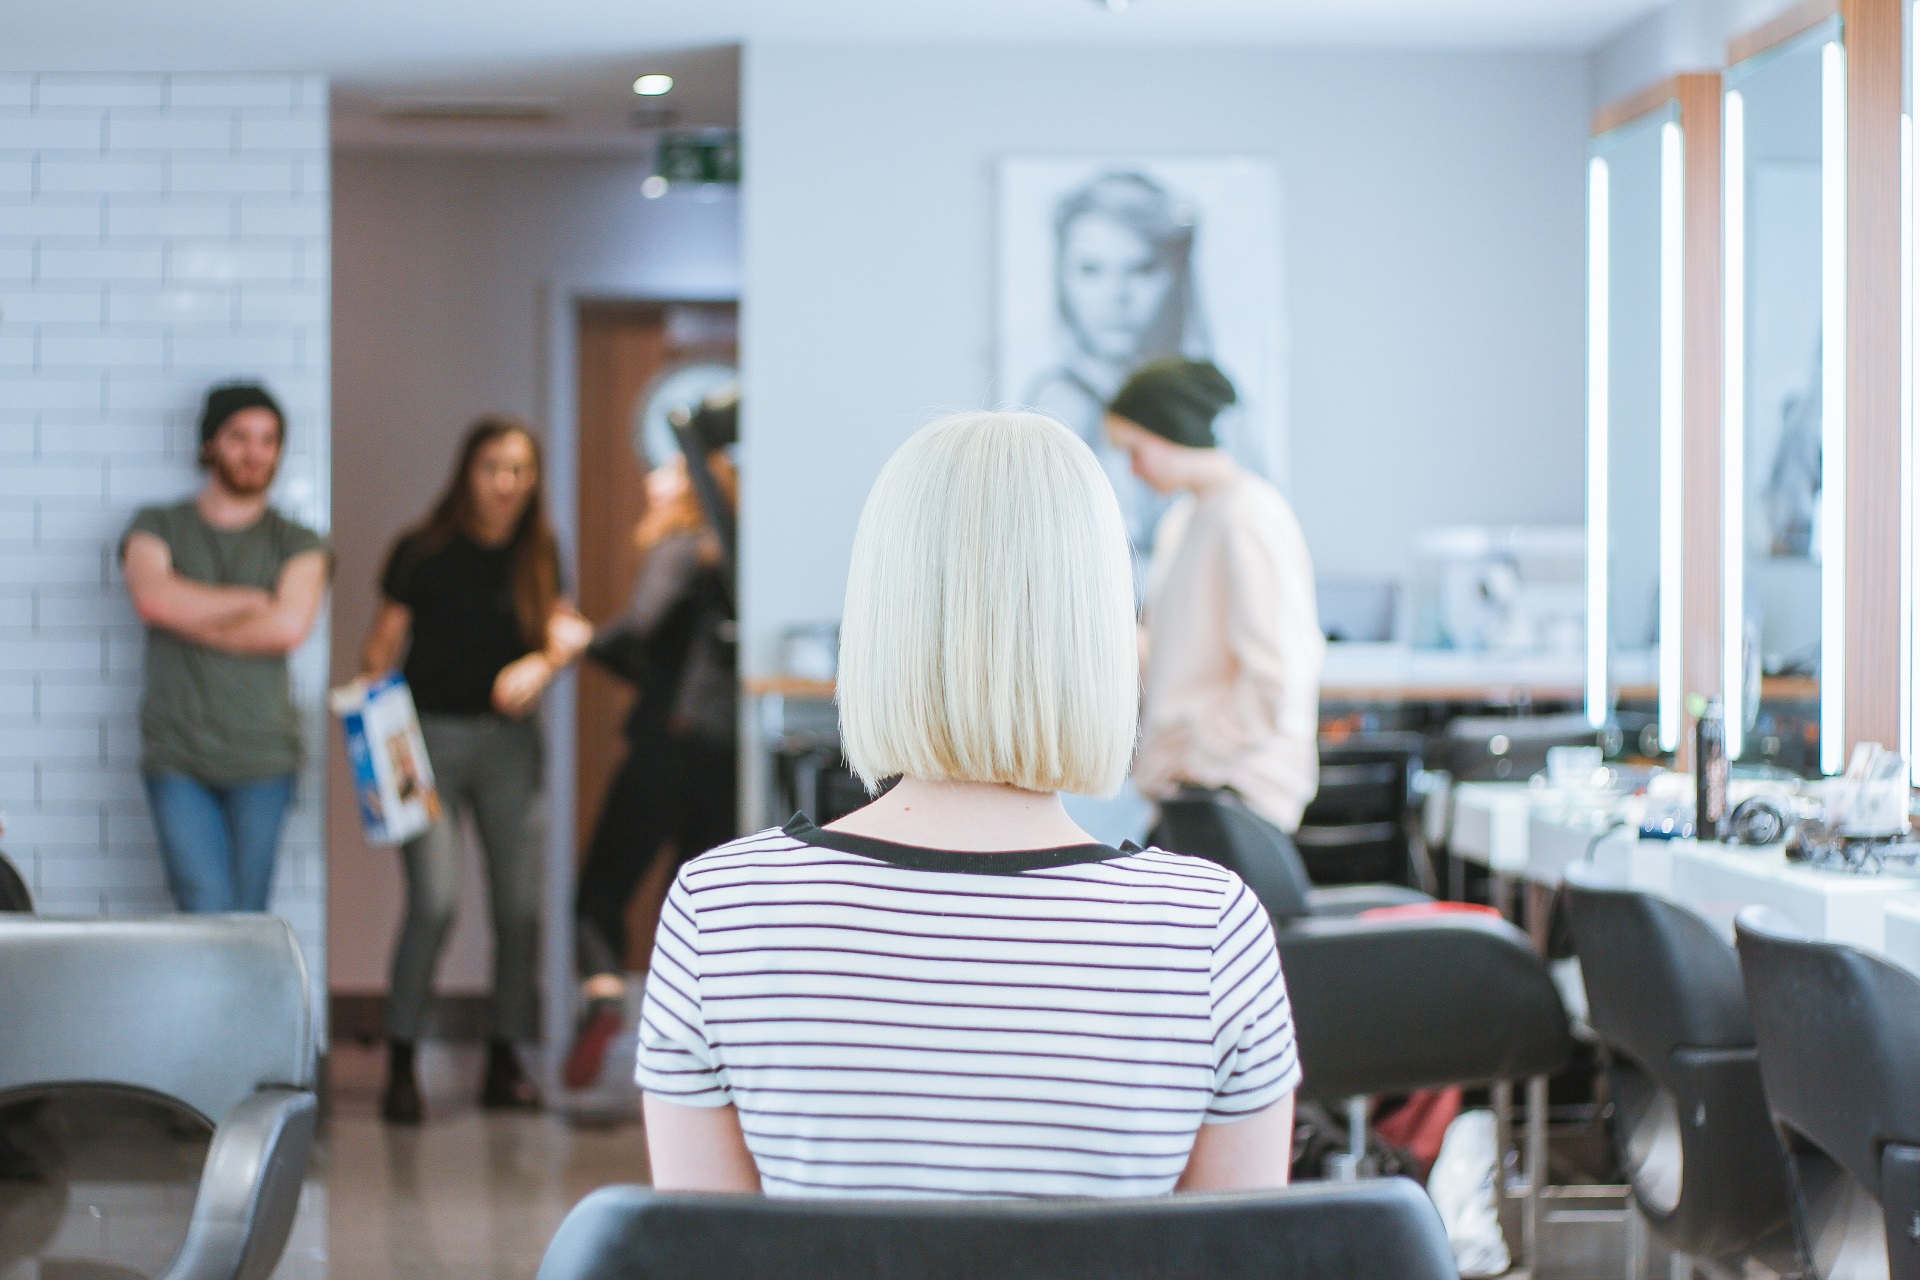 A website can help bring more customers to salons. 